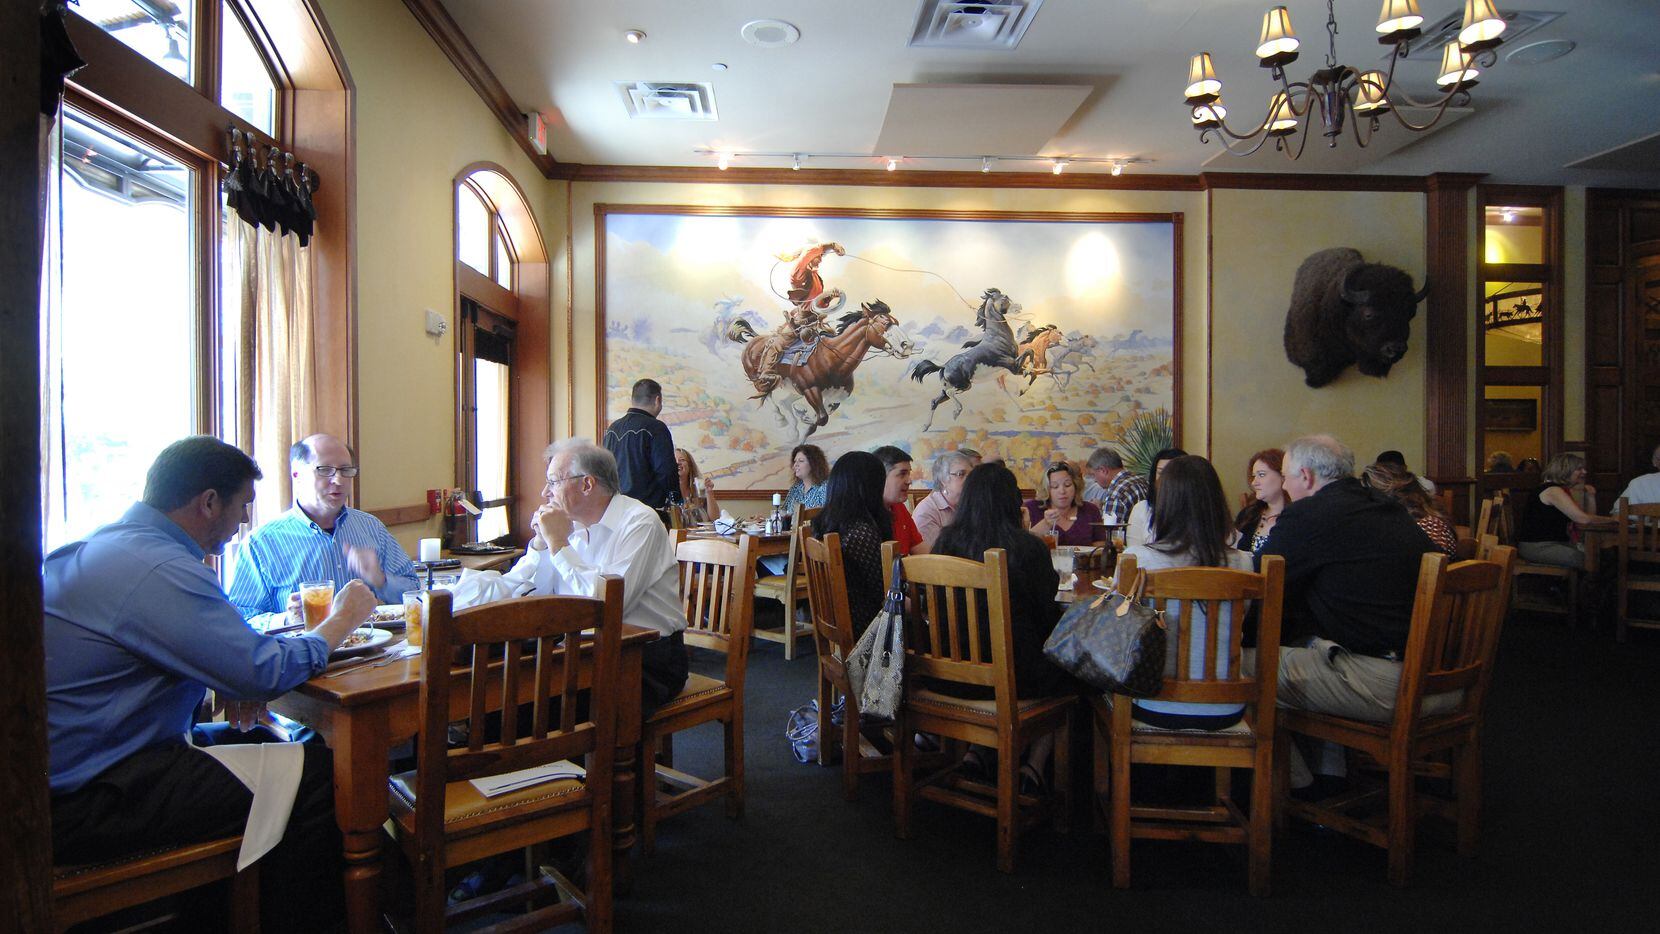 Dining room at Reata Restaurant 310 Houston Street in Fort Worth, Texas, in 2010.